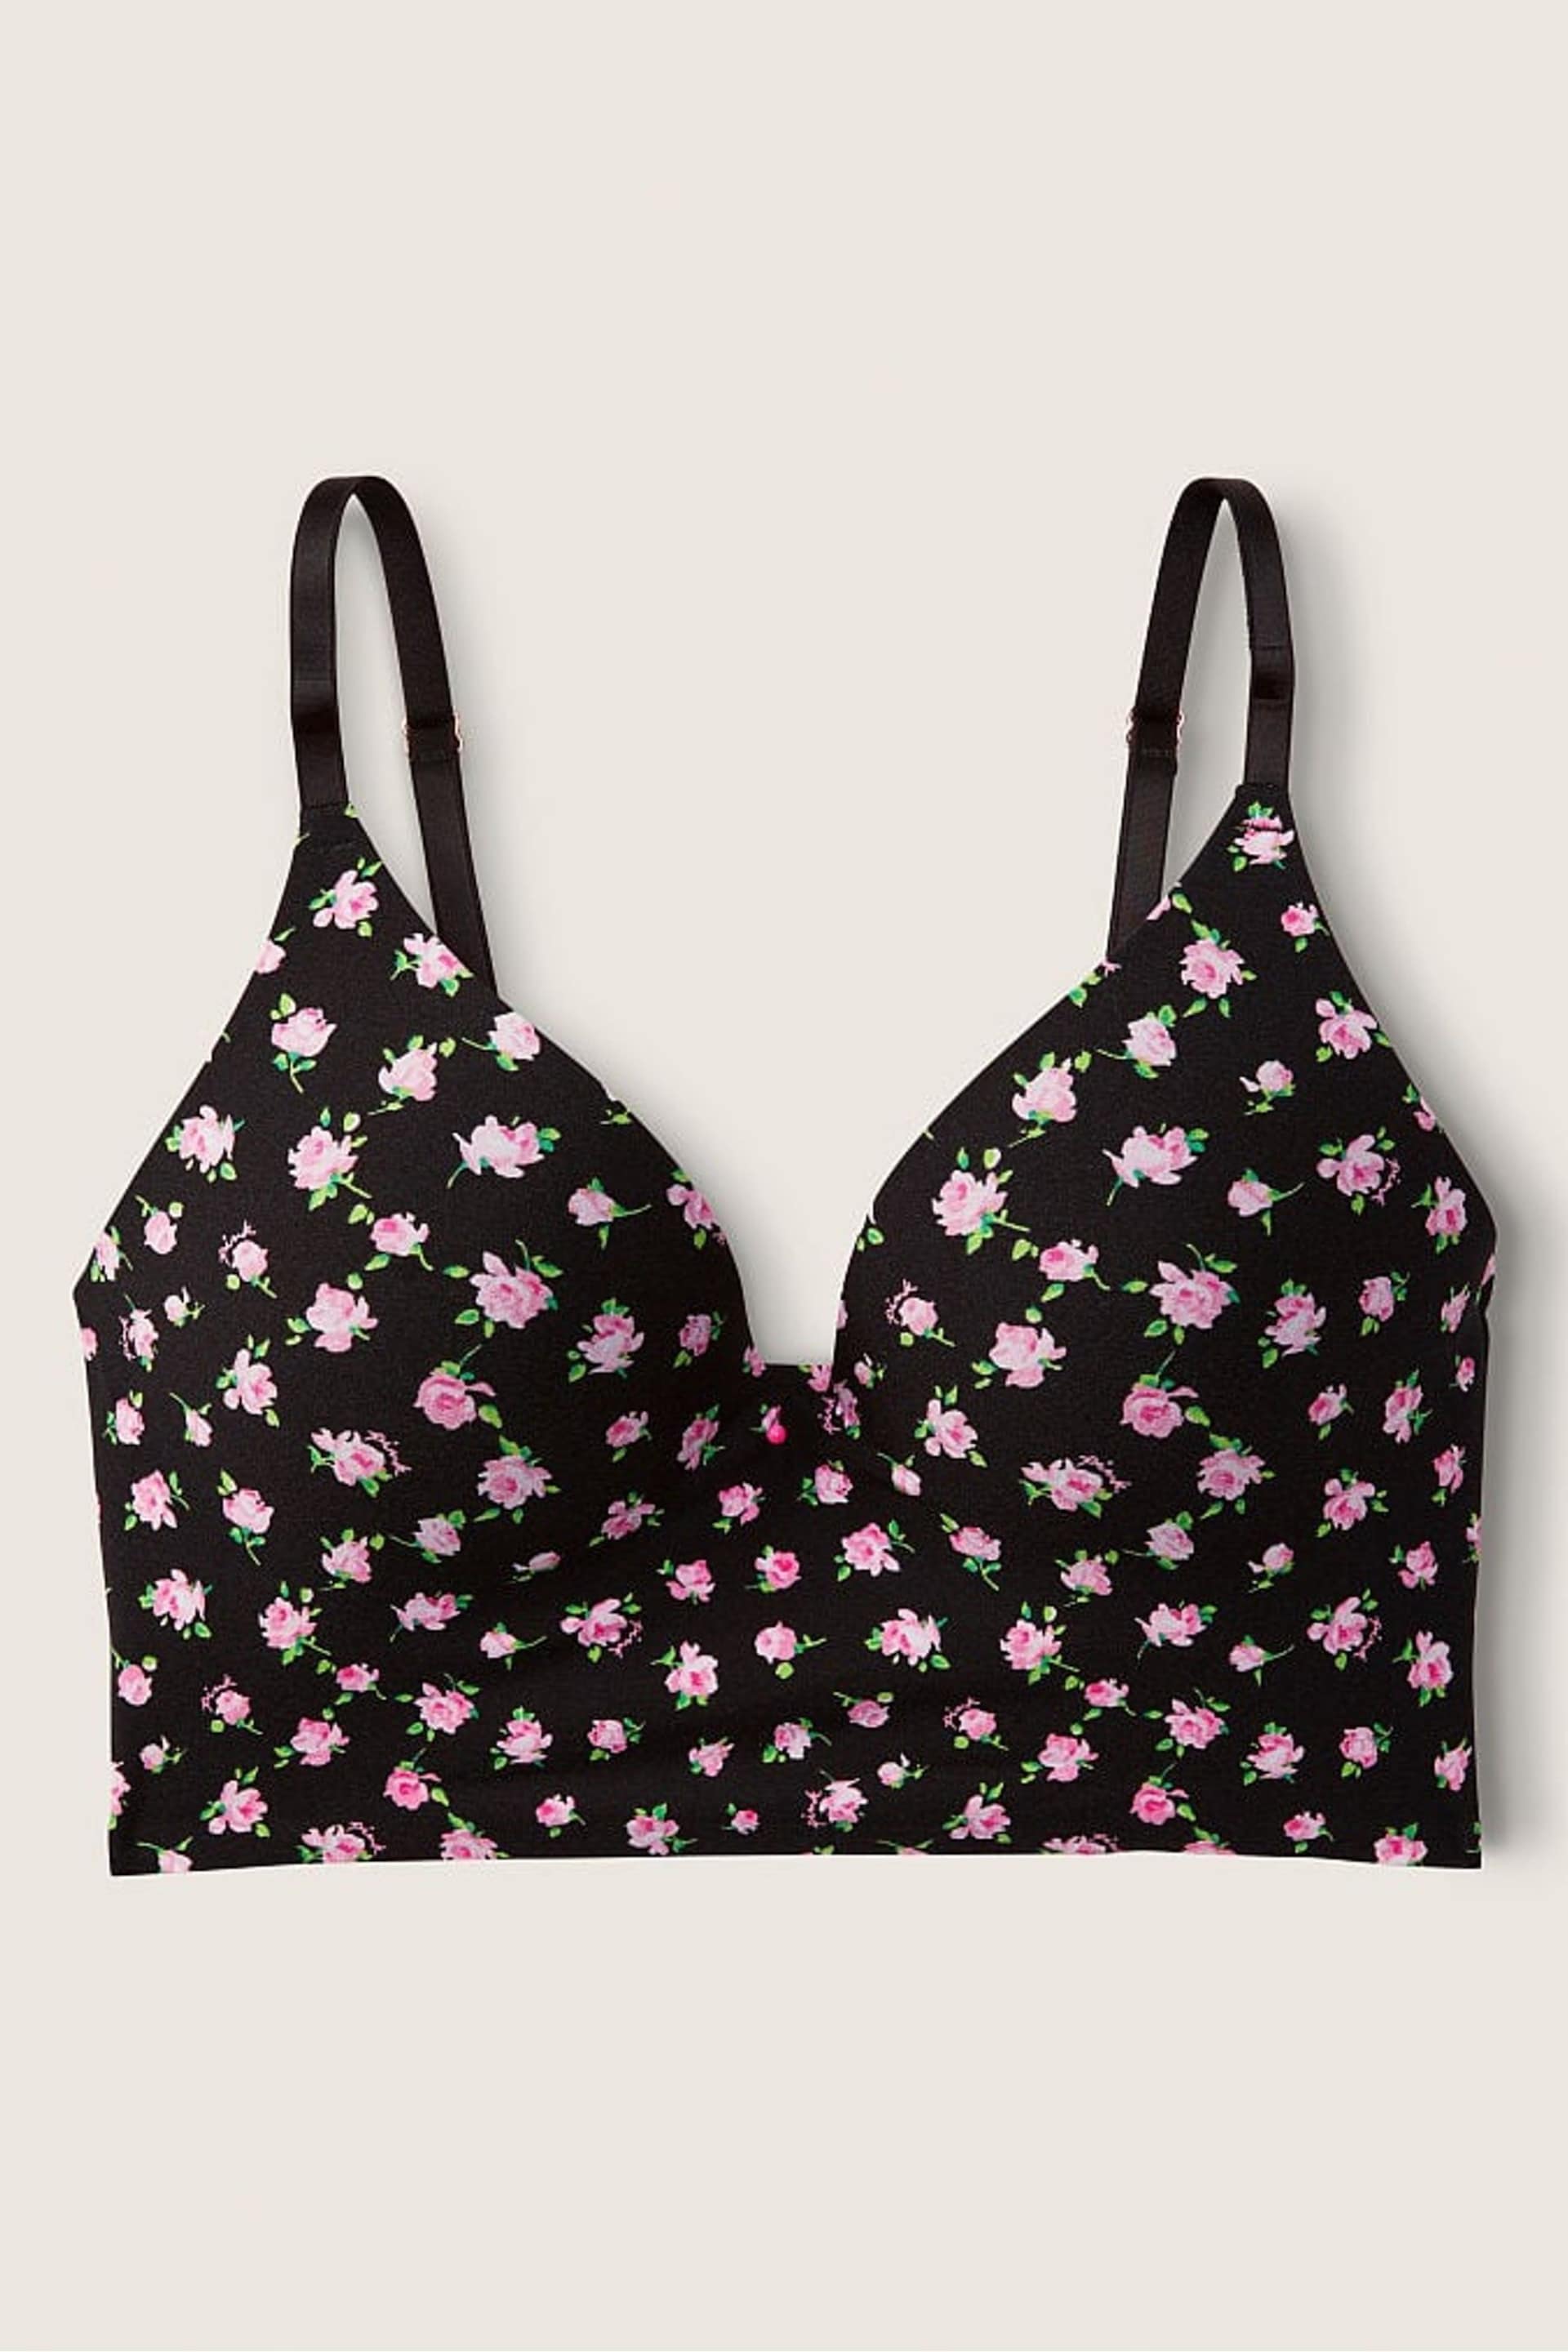 Victoria's Secret PINK Pure Black Floral Smooth Non Wired Push Up Bralette - Image 3 of 3